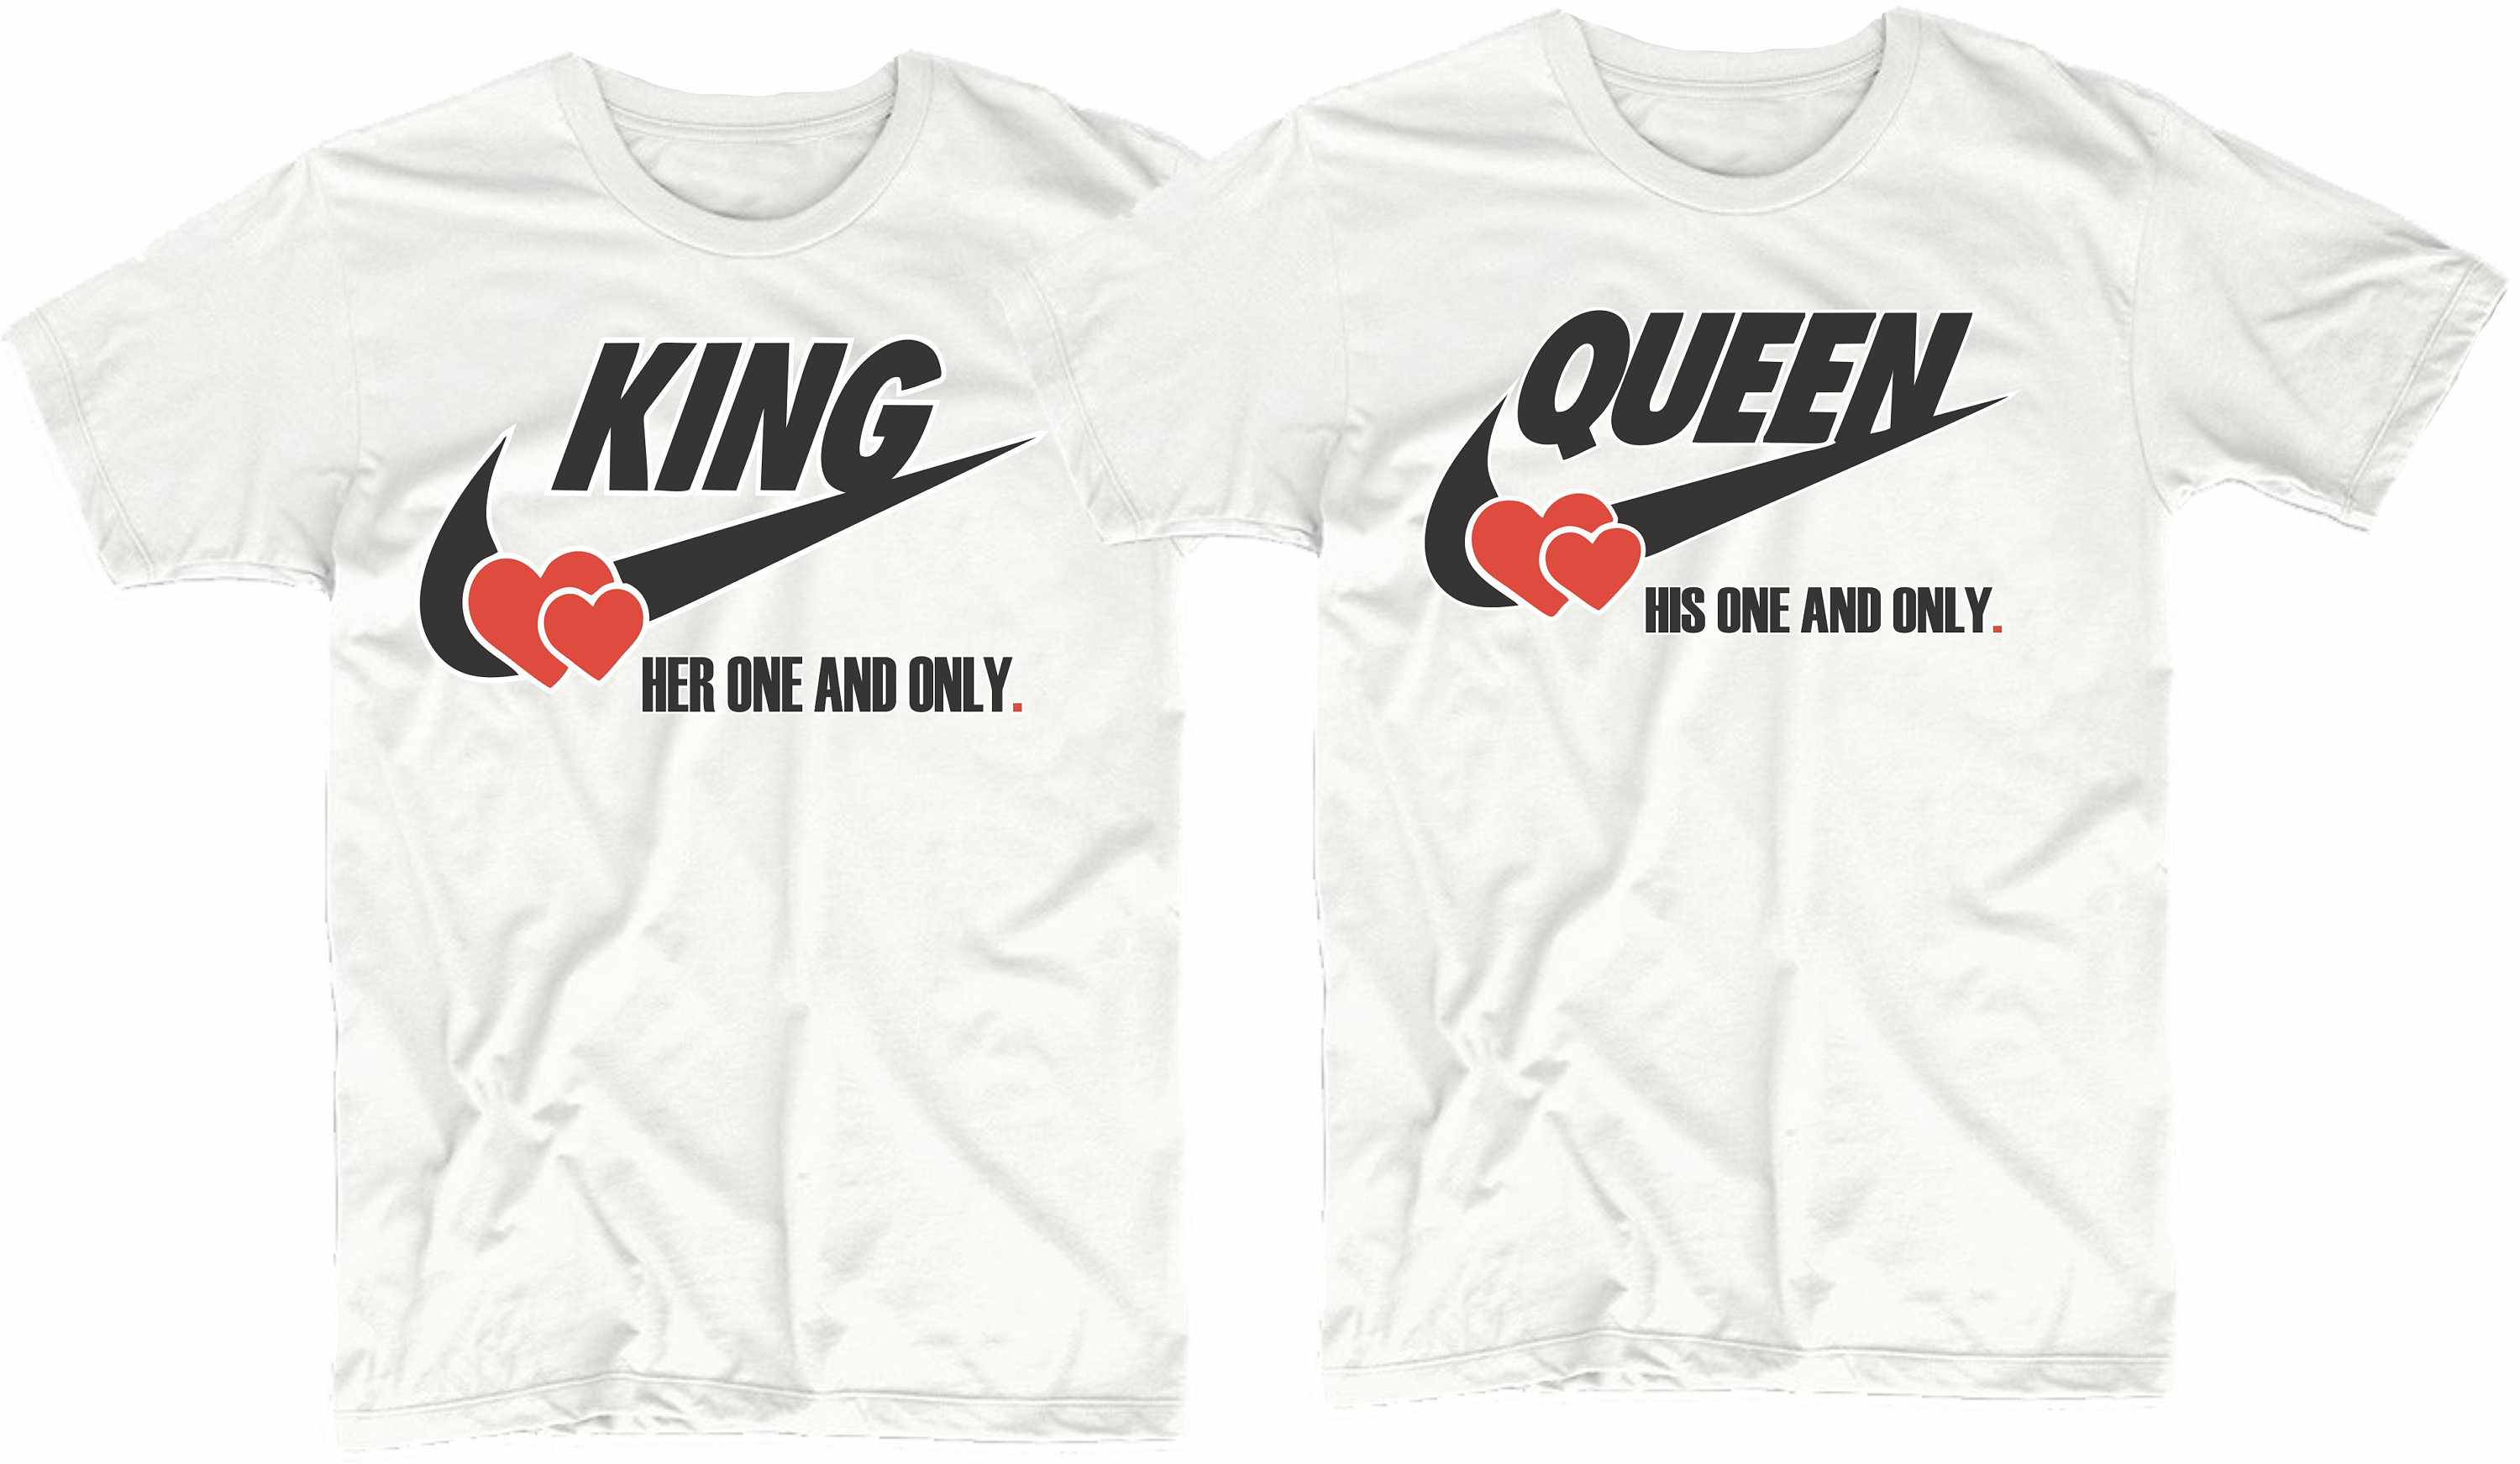 Formode Isse Uretfærdighed King and Queen Shirts - Etsy